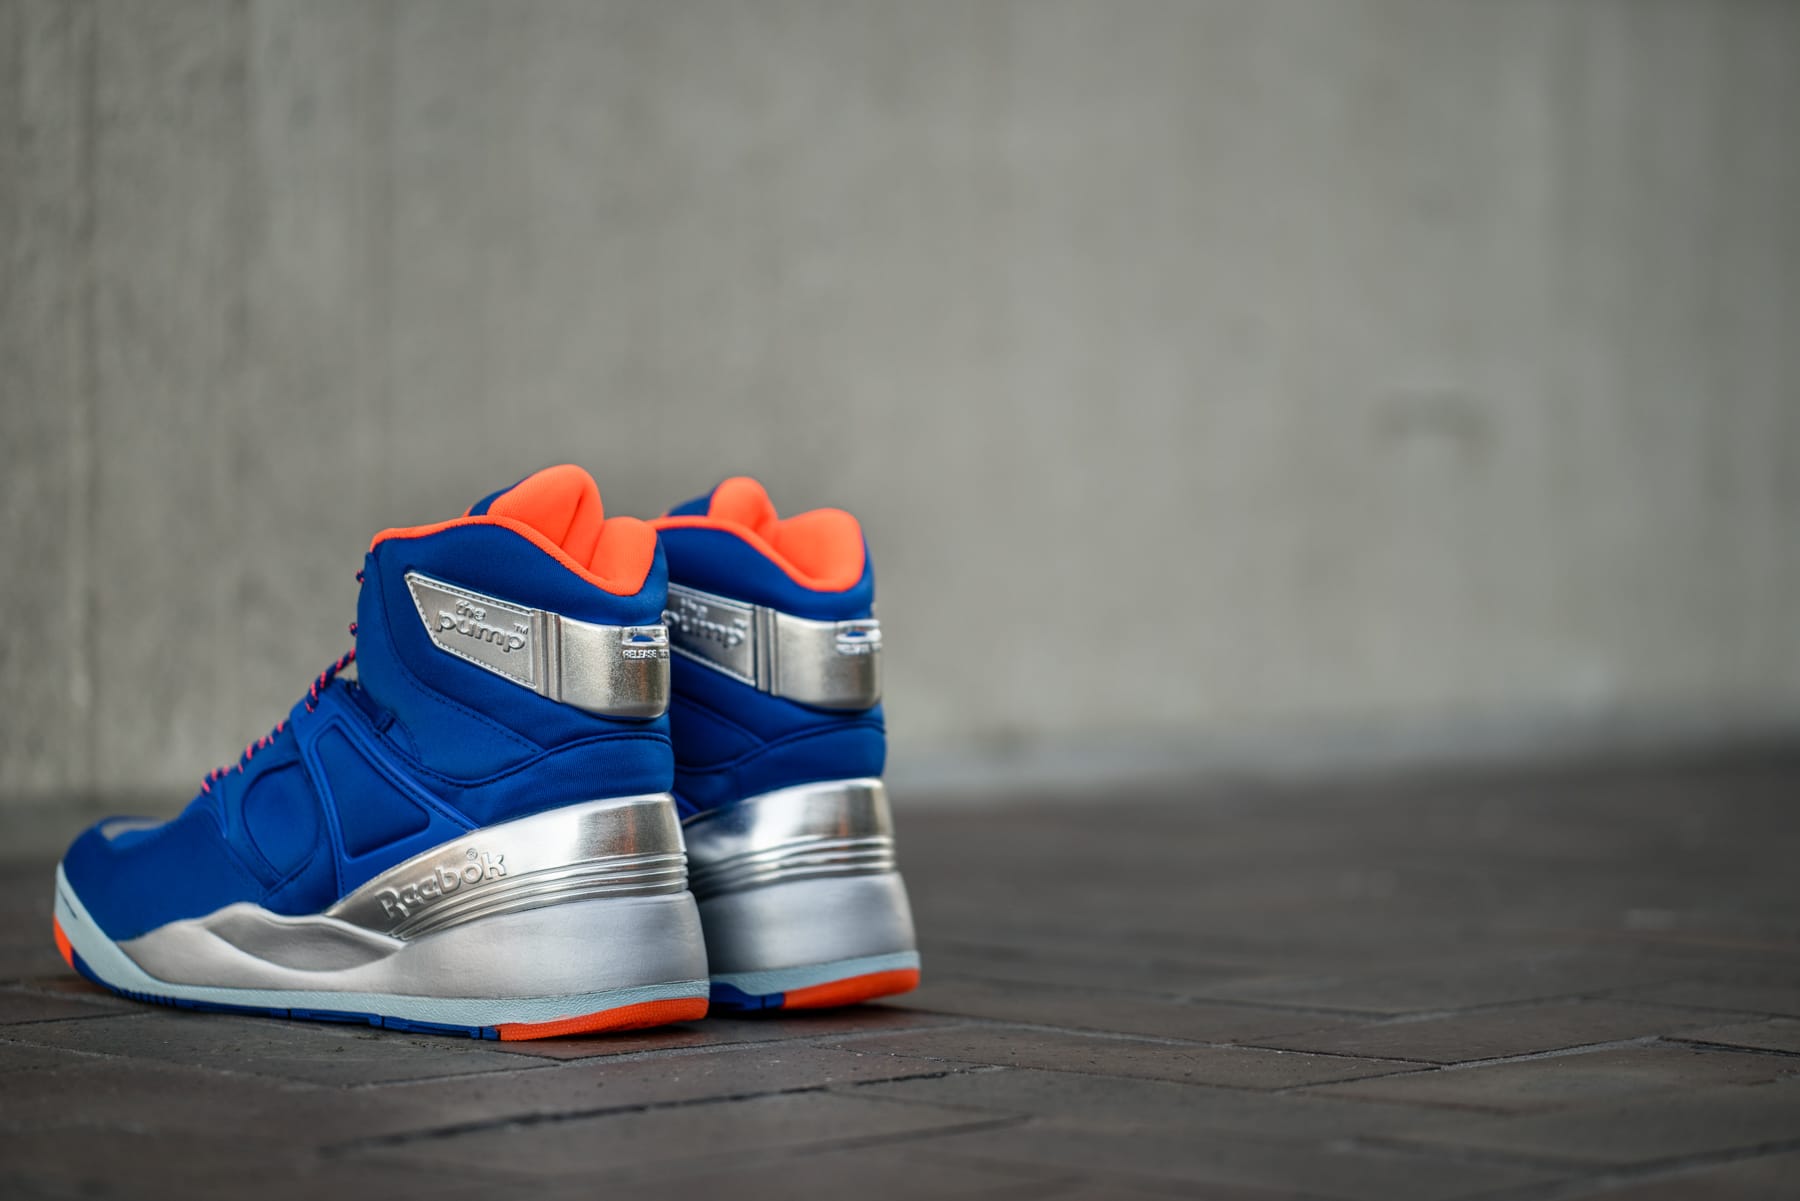 reebok the pump limited edition